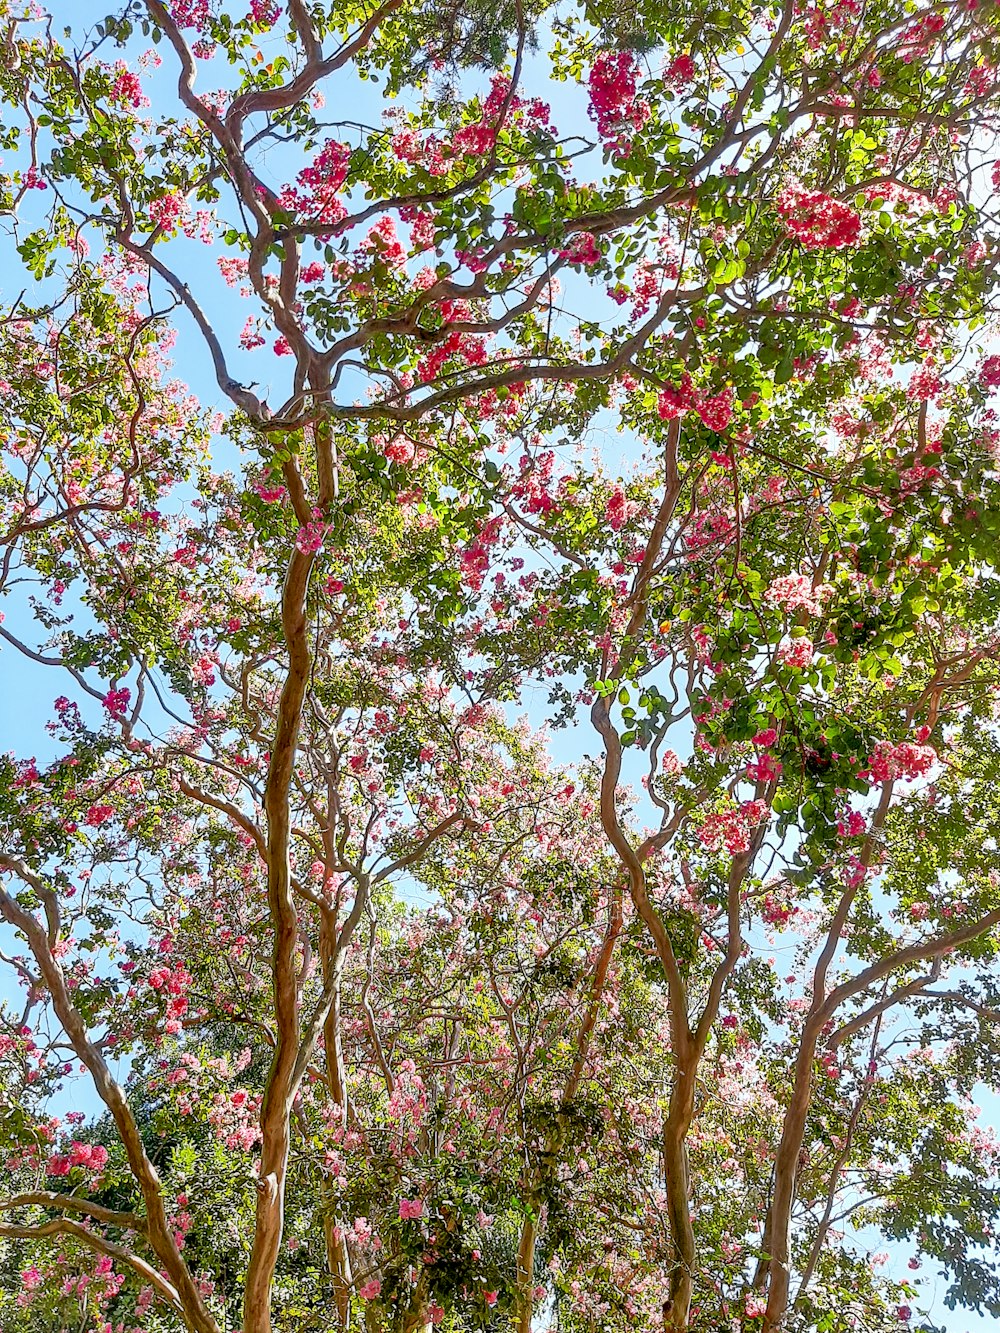 a group of trees with pink flowers on them